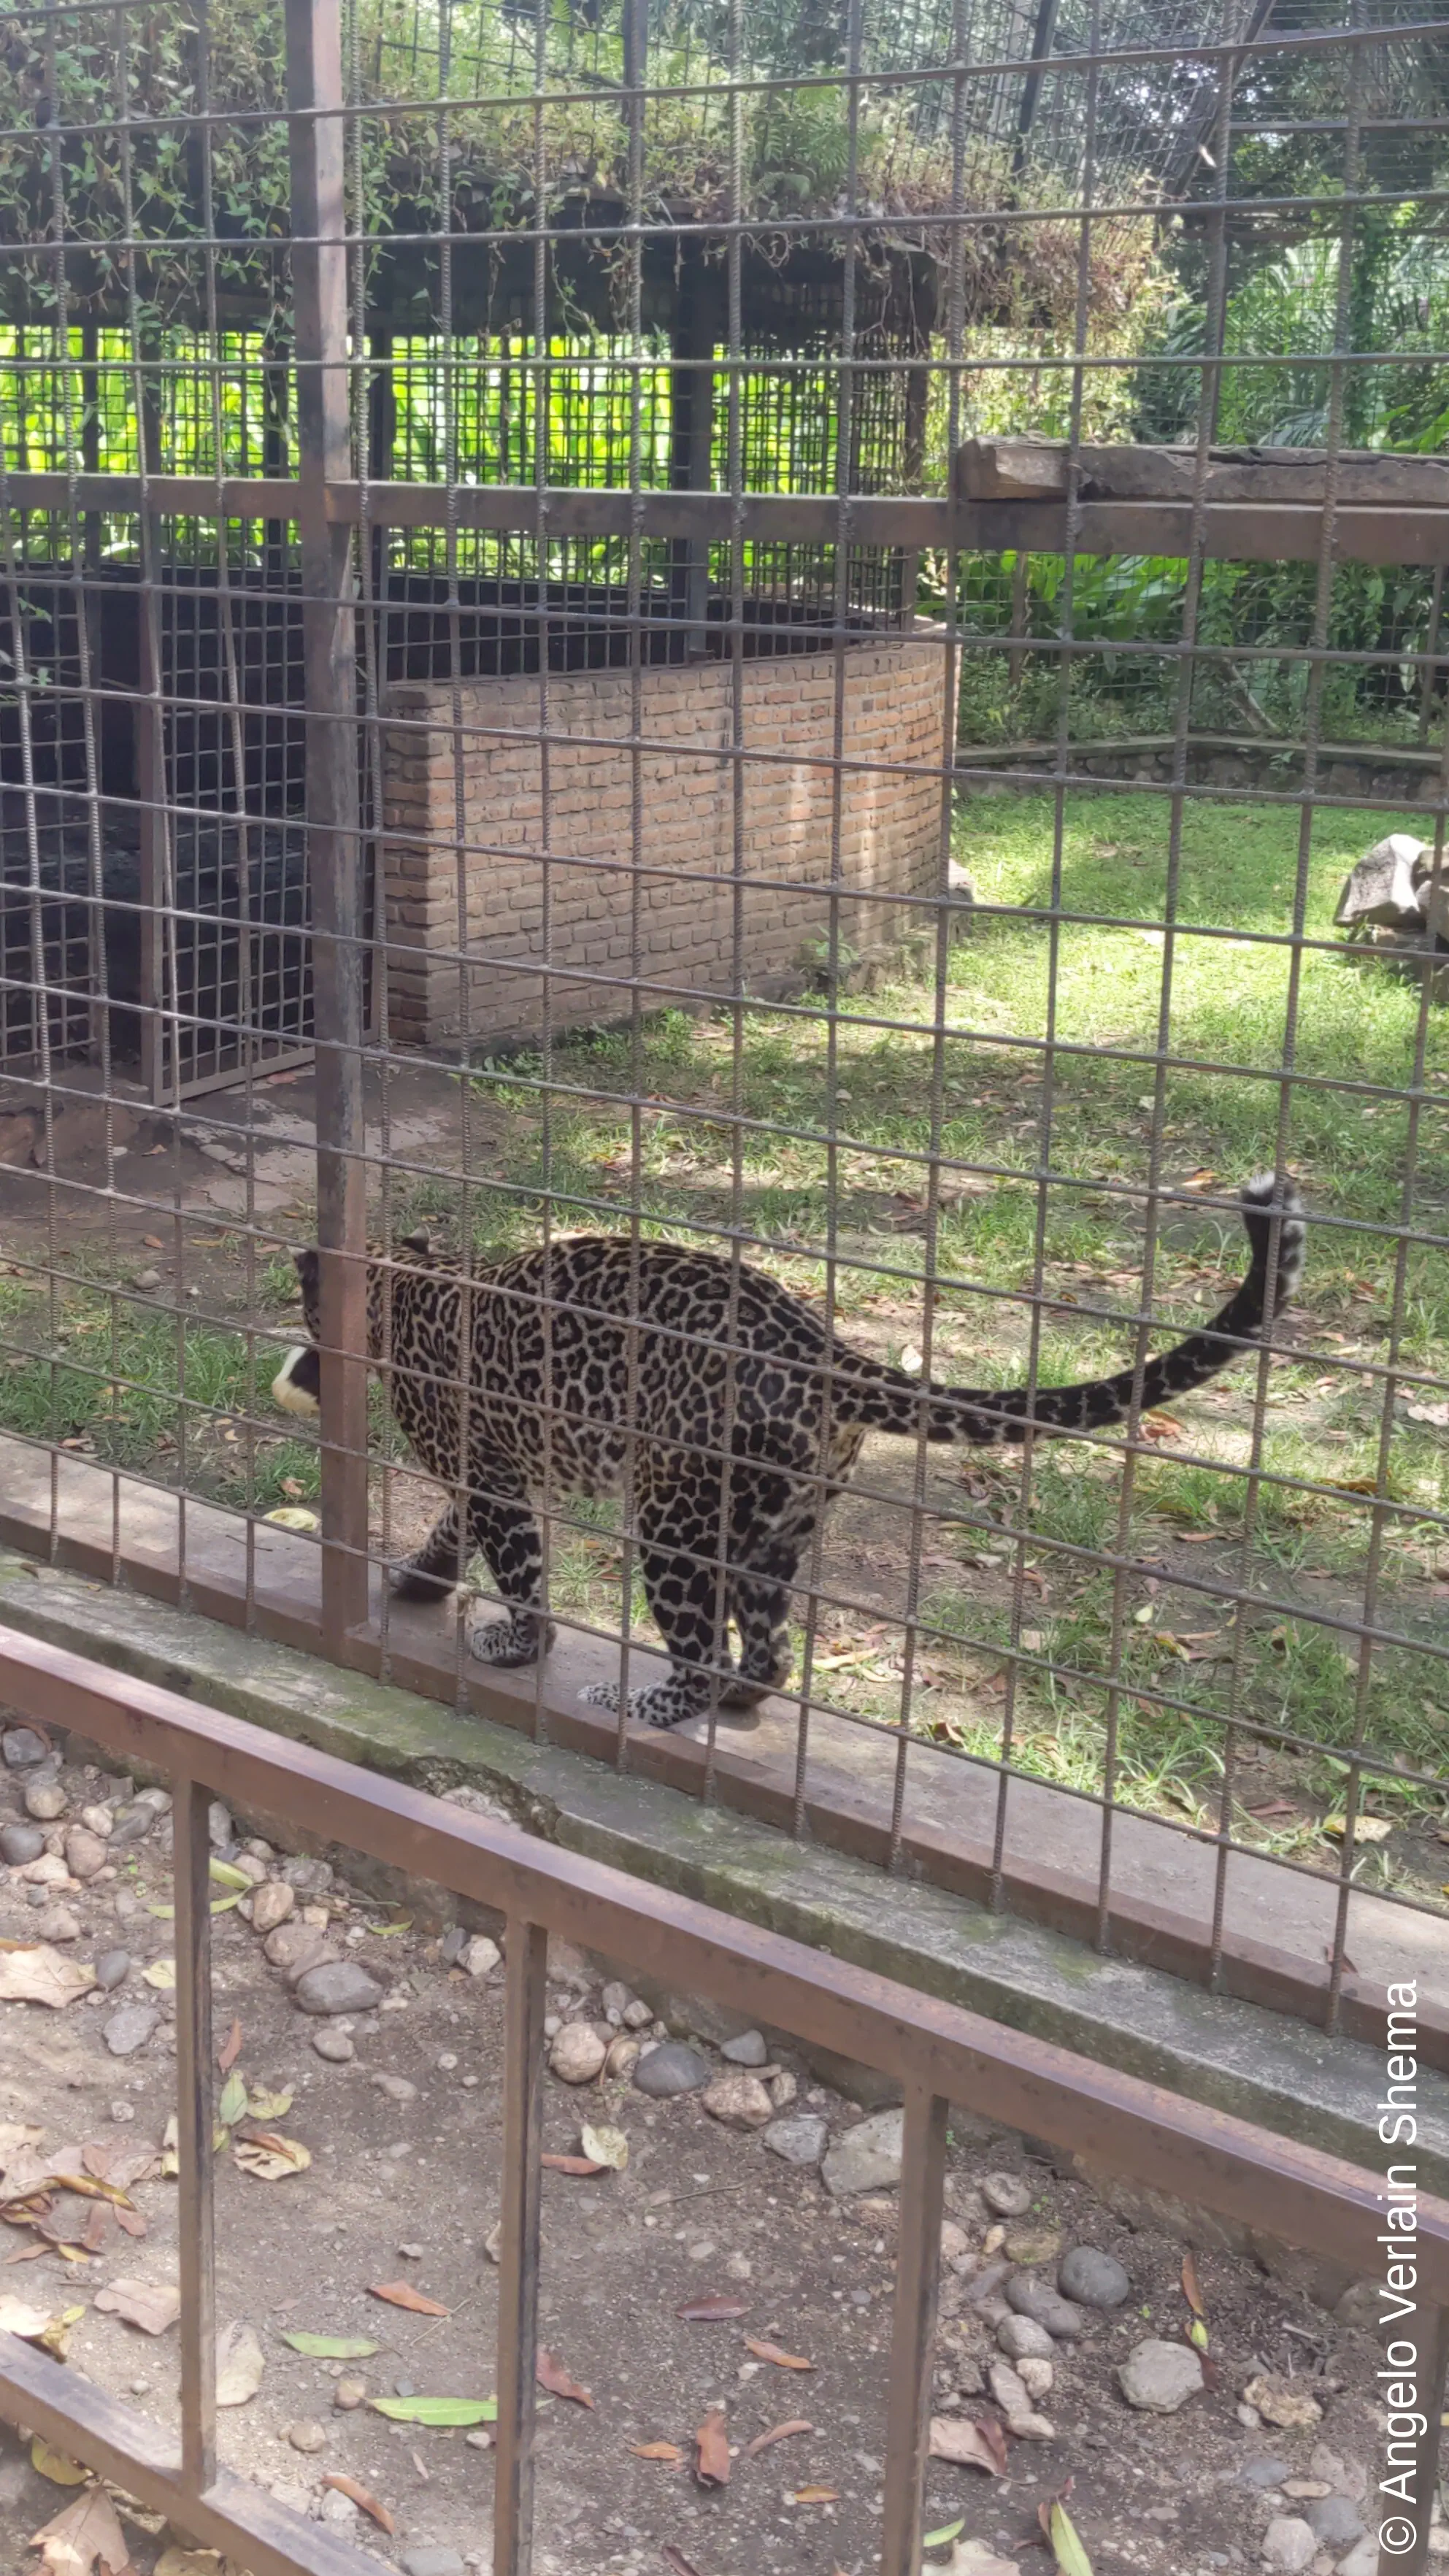 A leopard that was way more peaceful than I expected, we even touched her